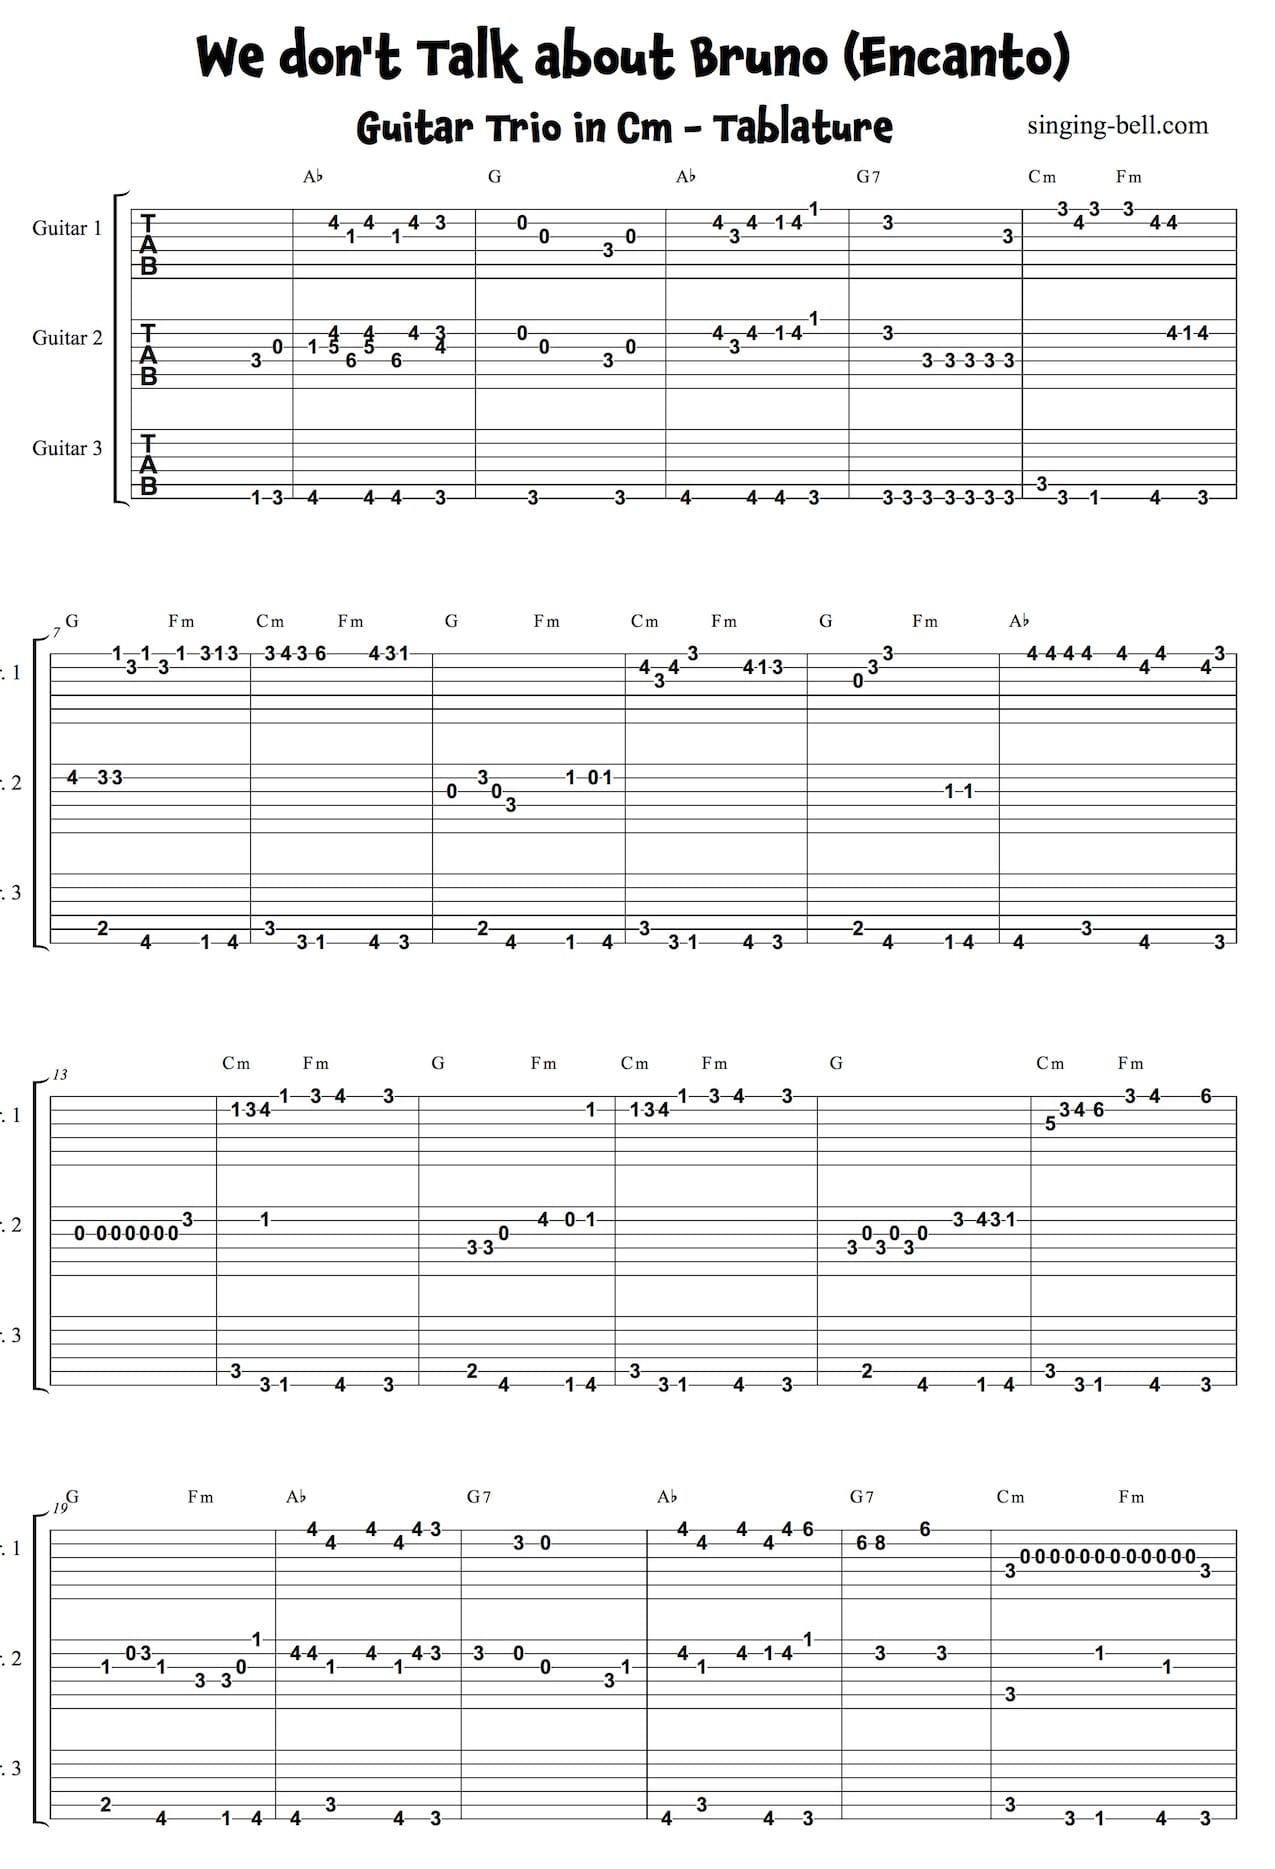 We Don't Talk About Bruno Encanto easy Guitar Trio Tablature Notation in Cm - page 1.